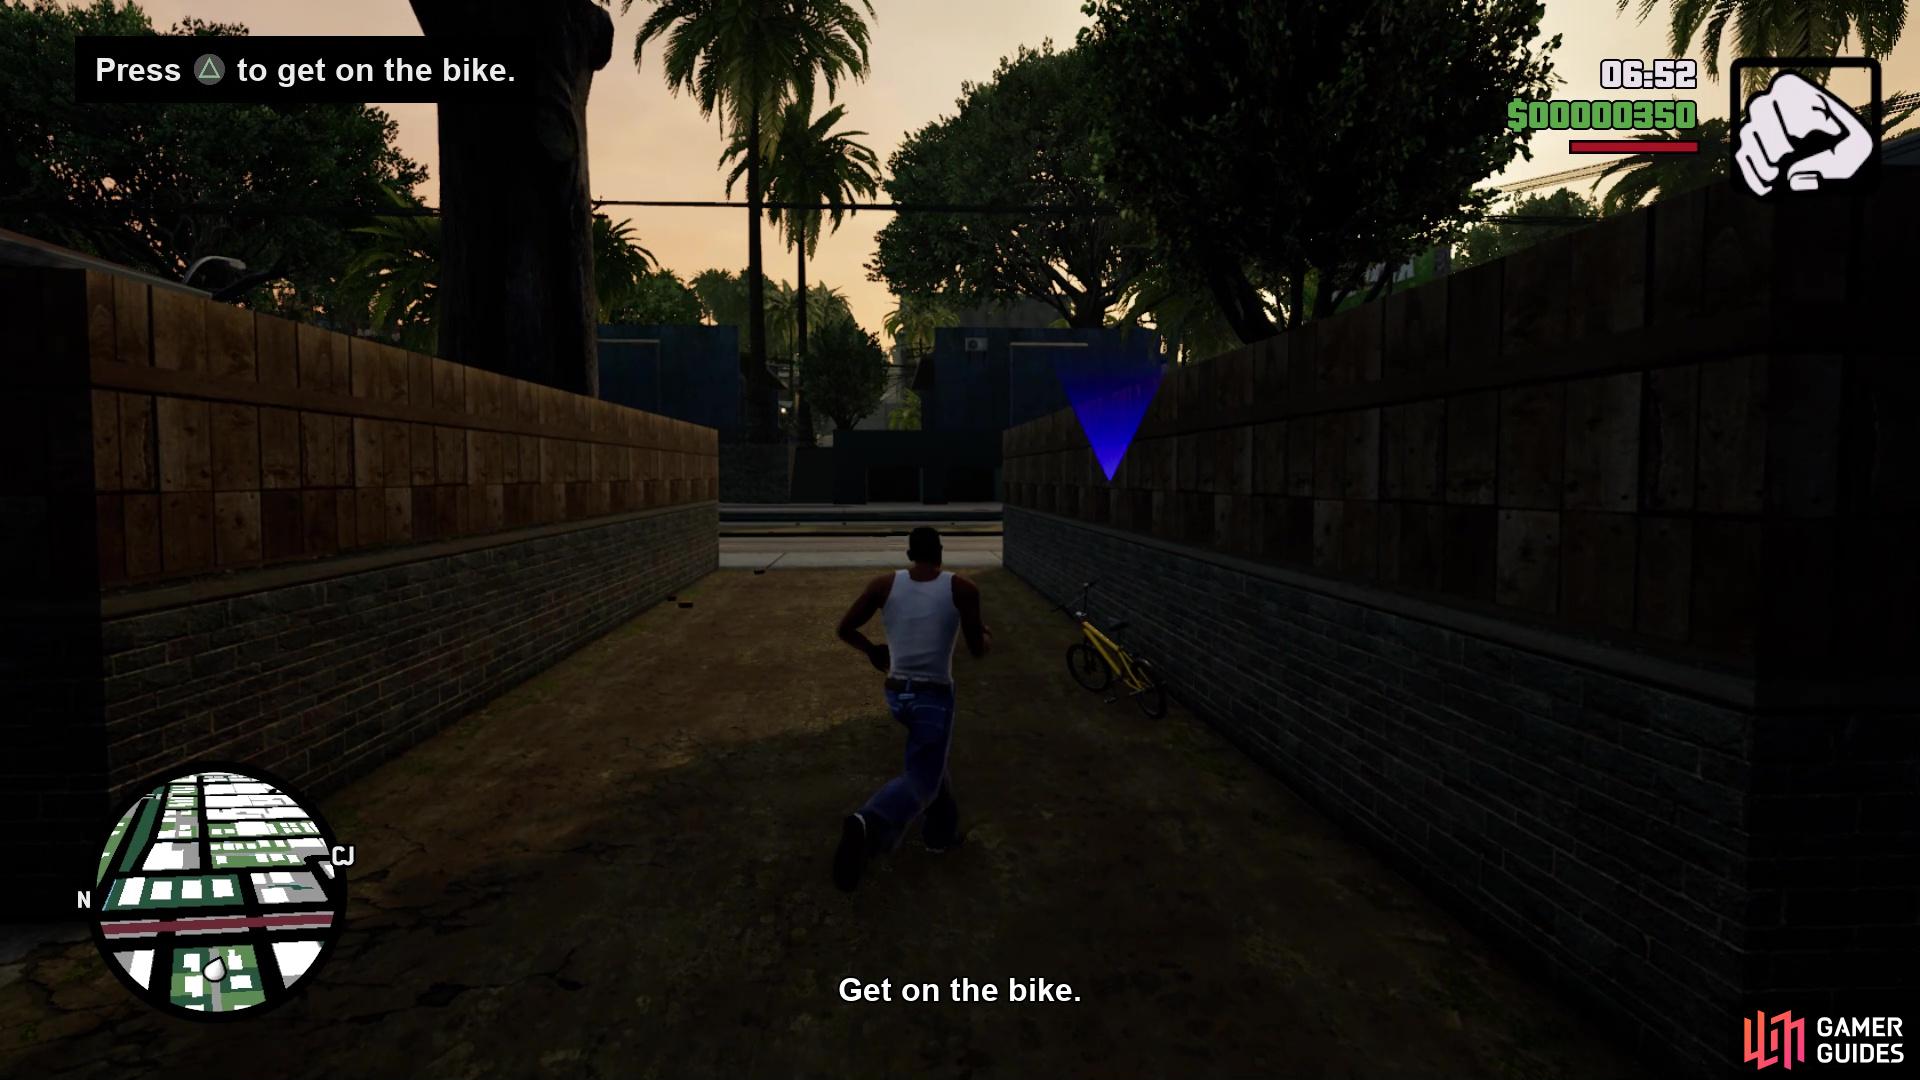 Get on the BMX bike in front of you when you have control